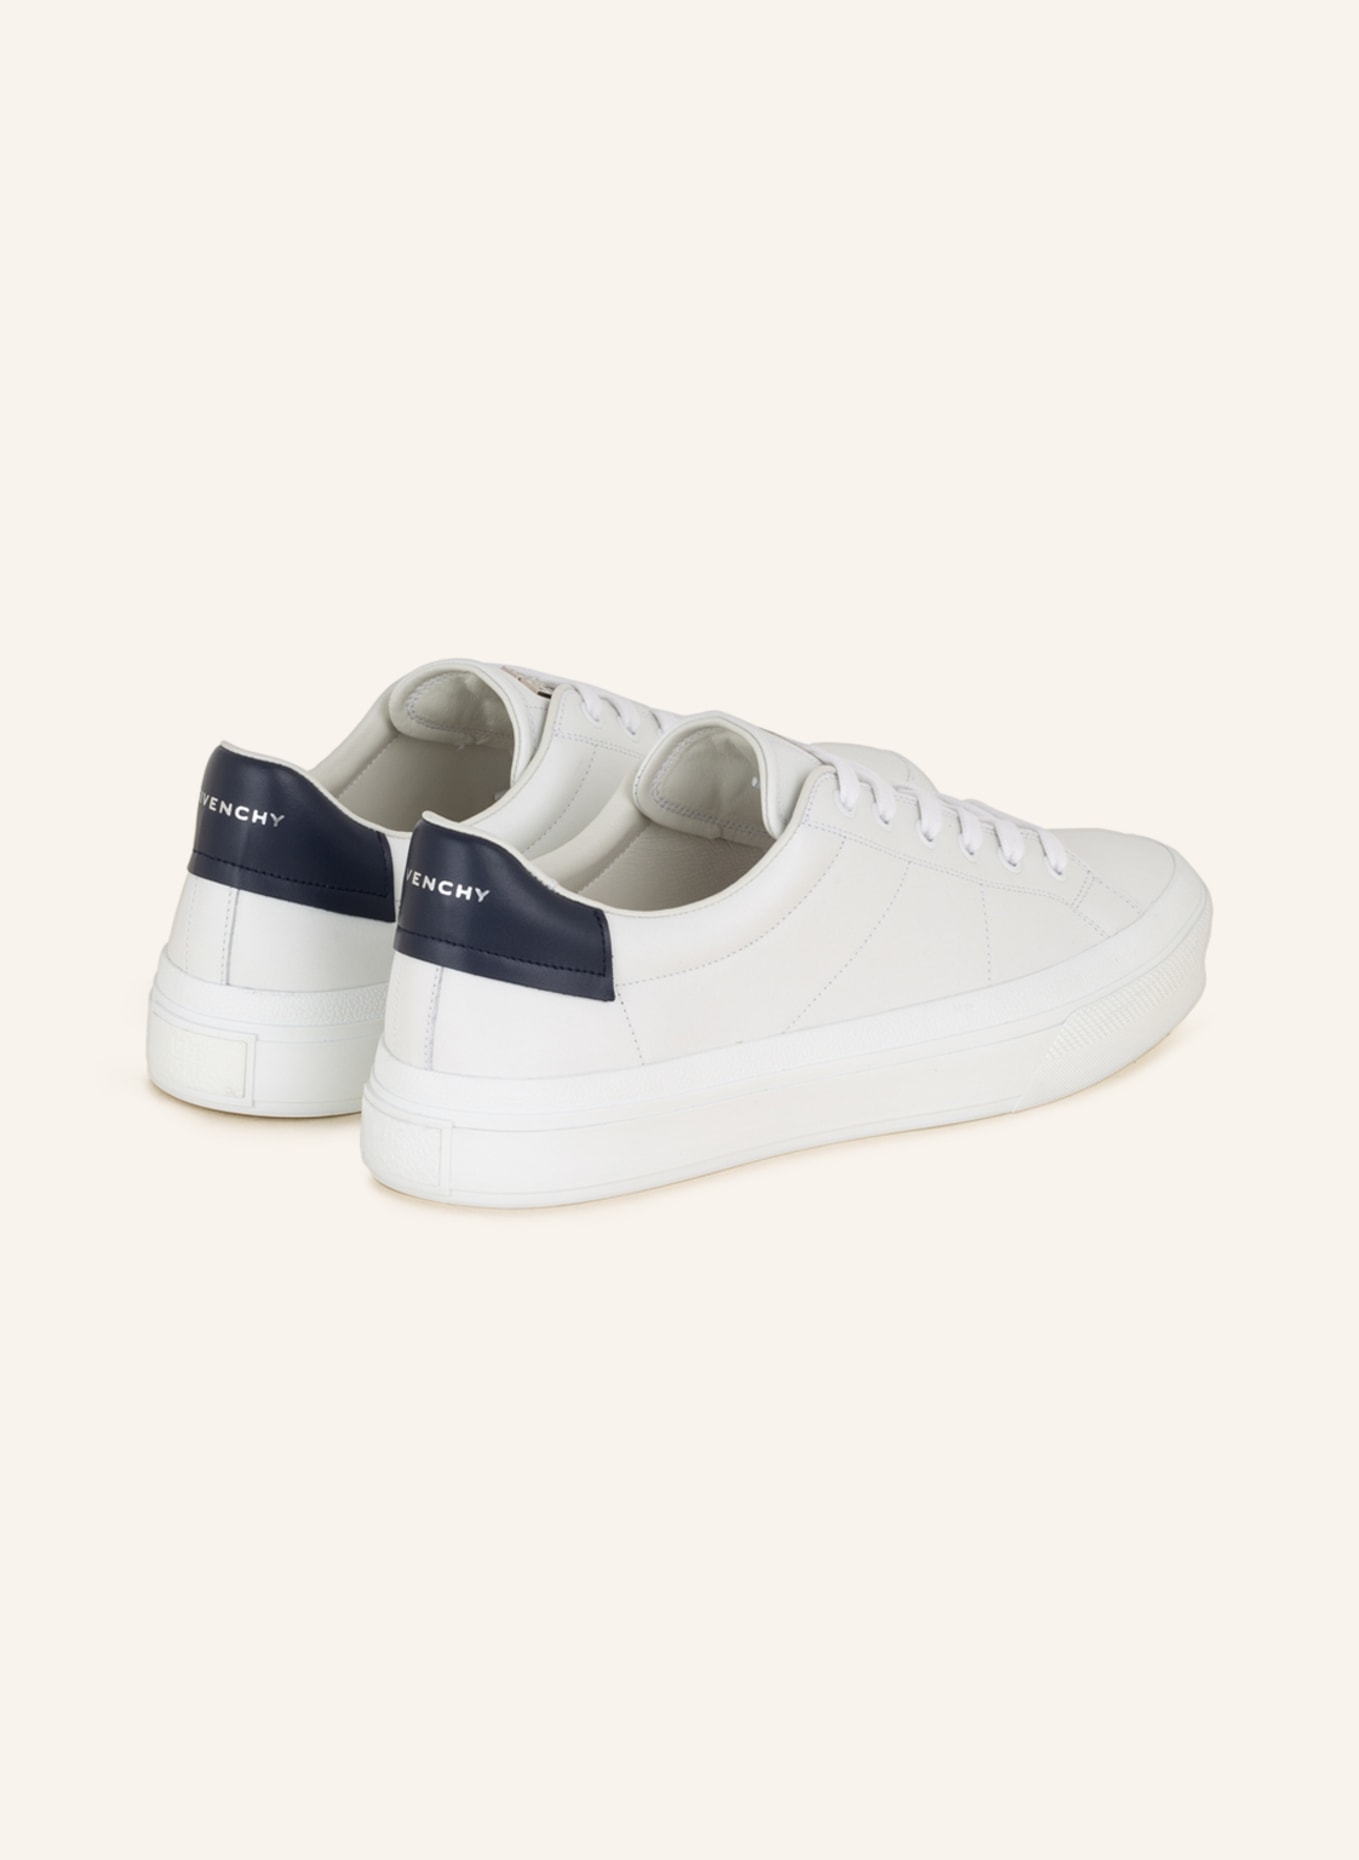 GIVENCHY Sneaker CITY, Farbe: WEISS (Bild 2)